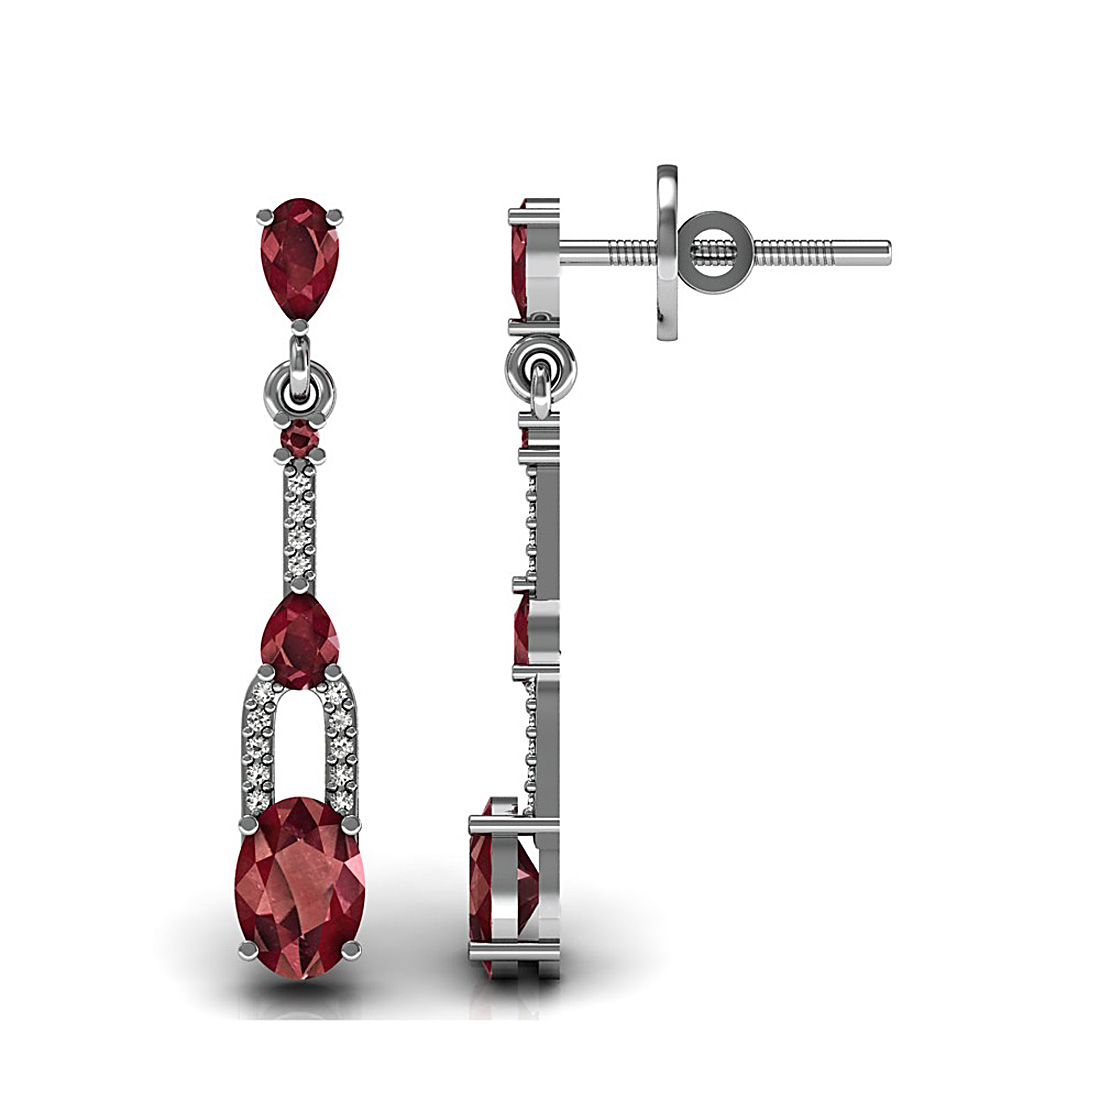 Dangle drop earrings made in 18k solid white gold studded with real diamond and natural ruby gemstone.